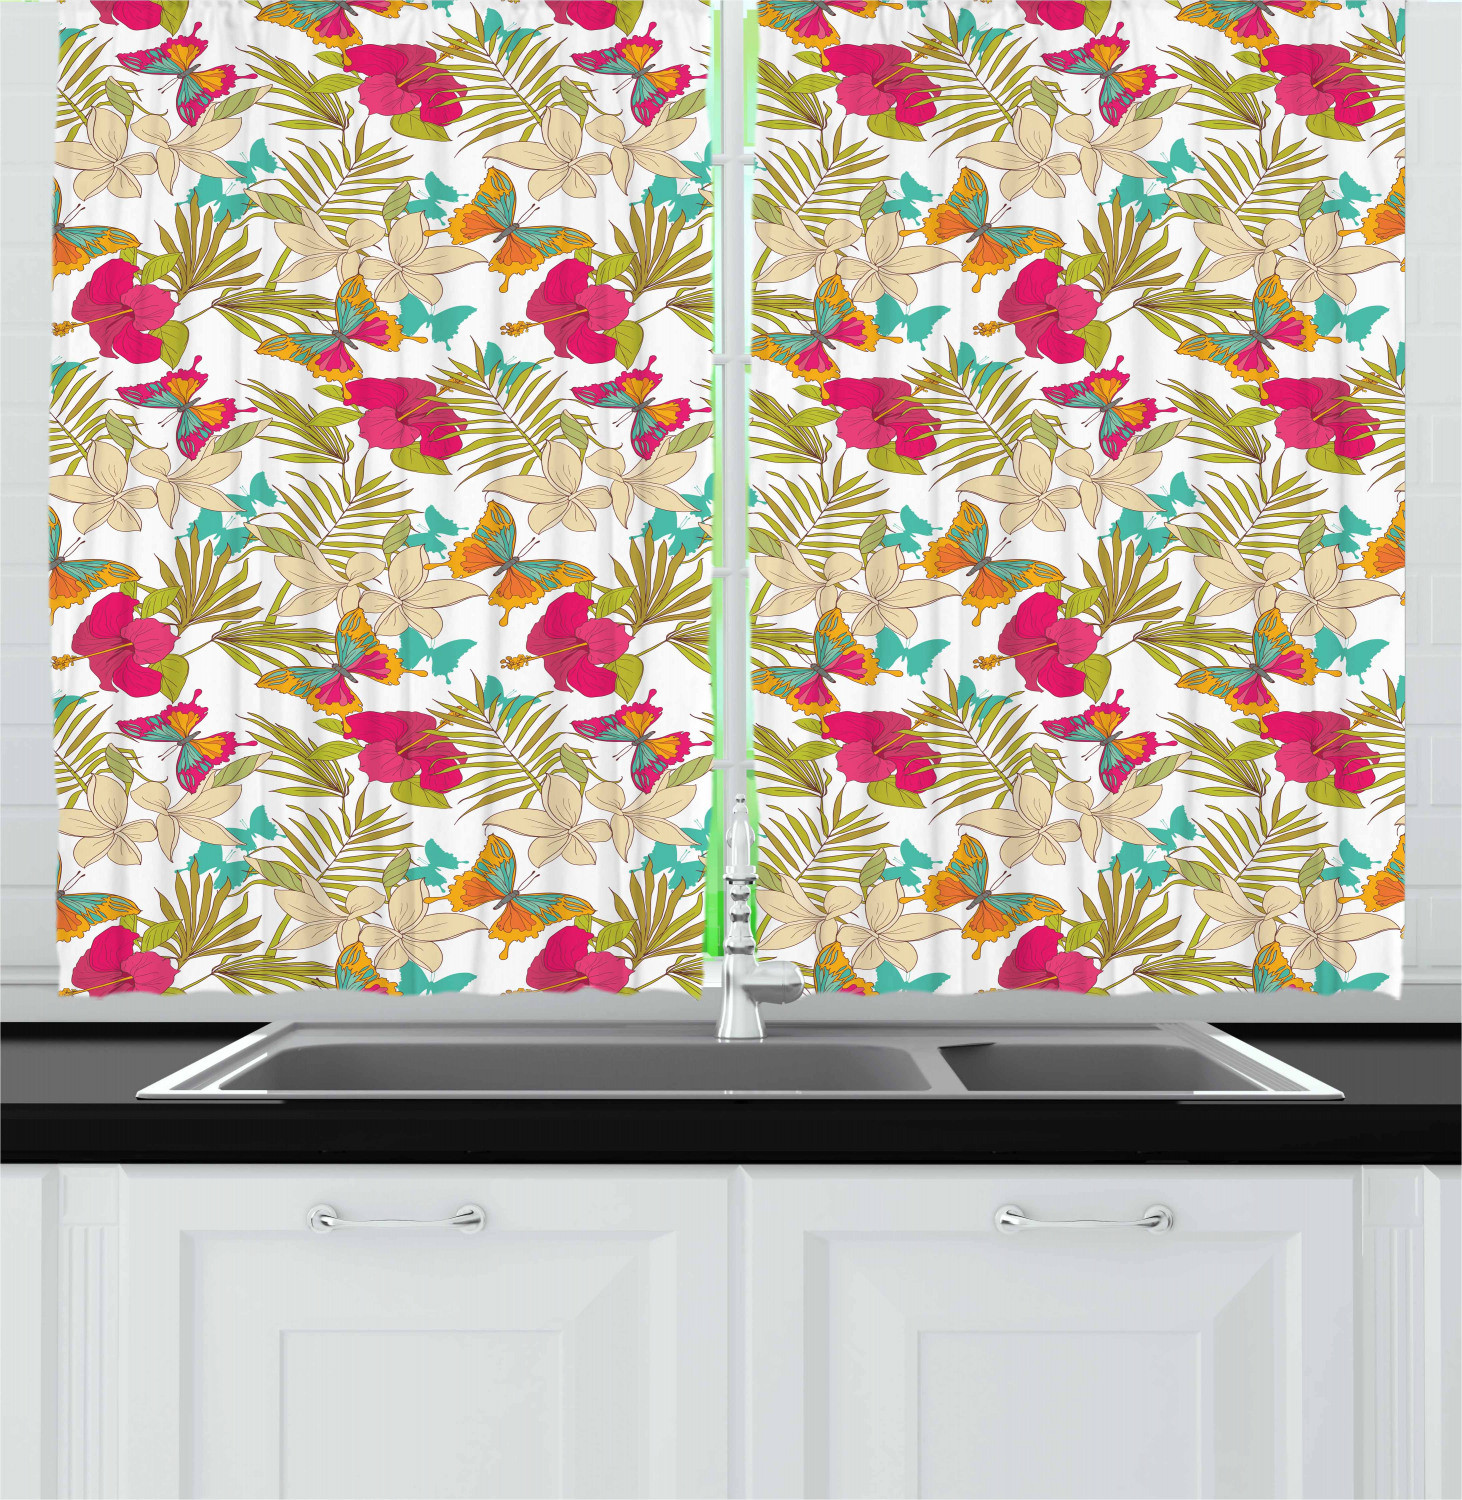 Fabric For Kitchen Curtain Elegant Vintage Fabric Kitchen Curtains 2 Panel Set Window Drapes Of Fabric For Kitchen Curtain 